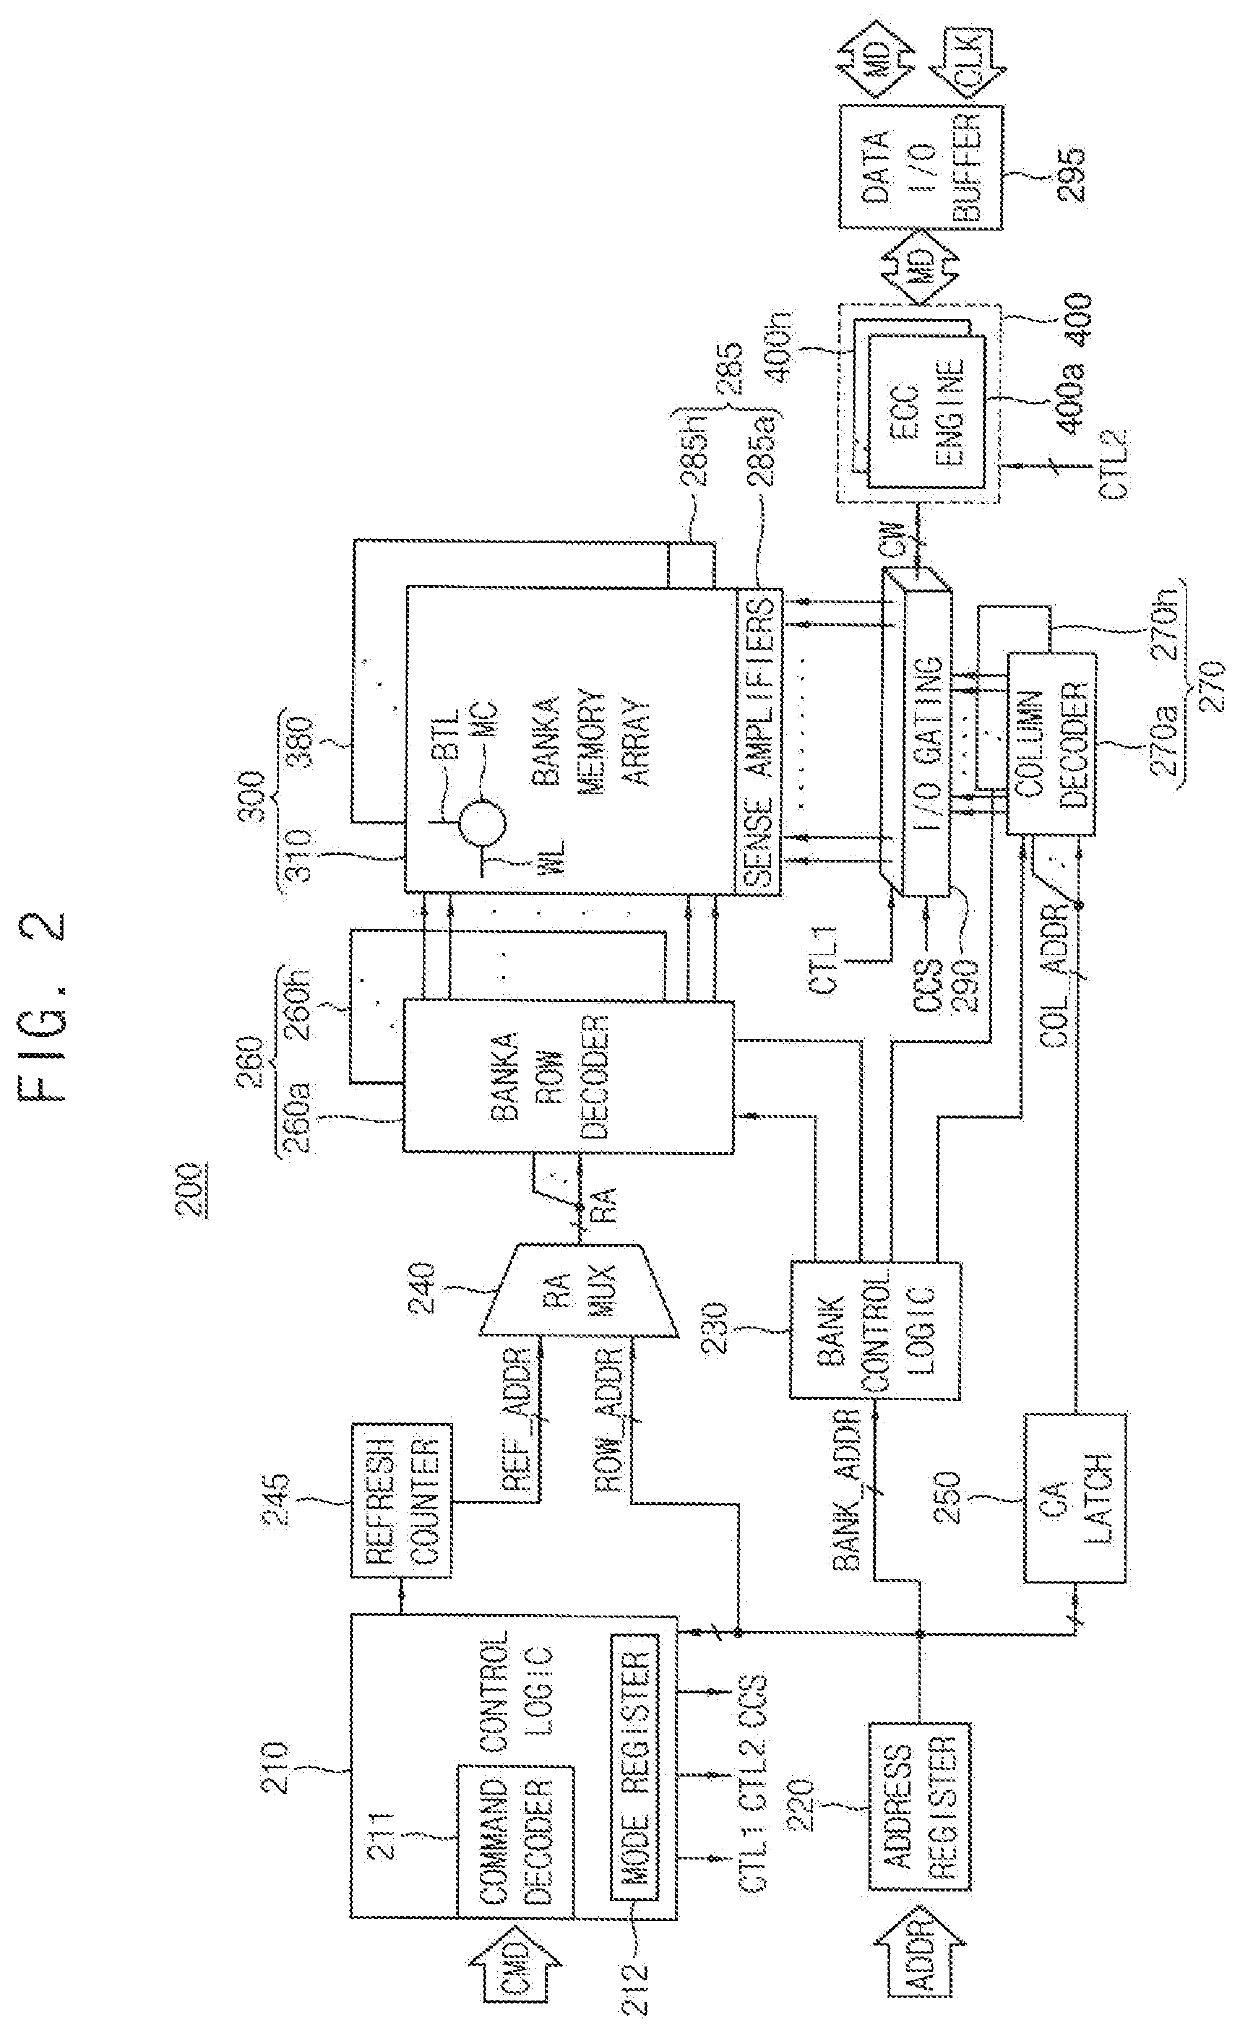 Semiconductor memory devices, memory systems and methods of operating semiconductor memory devices